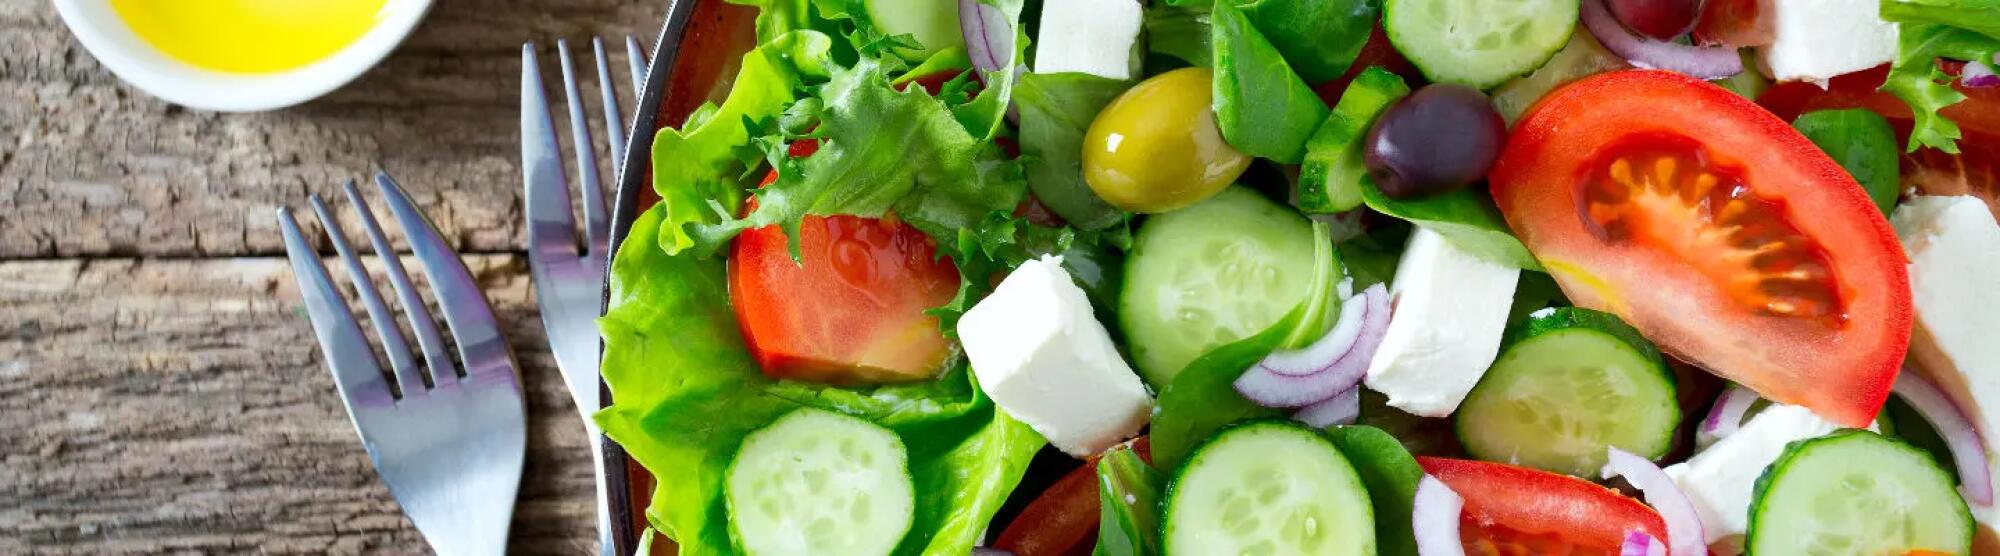 LA02_assiette-salade-composee-fromage